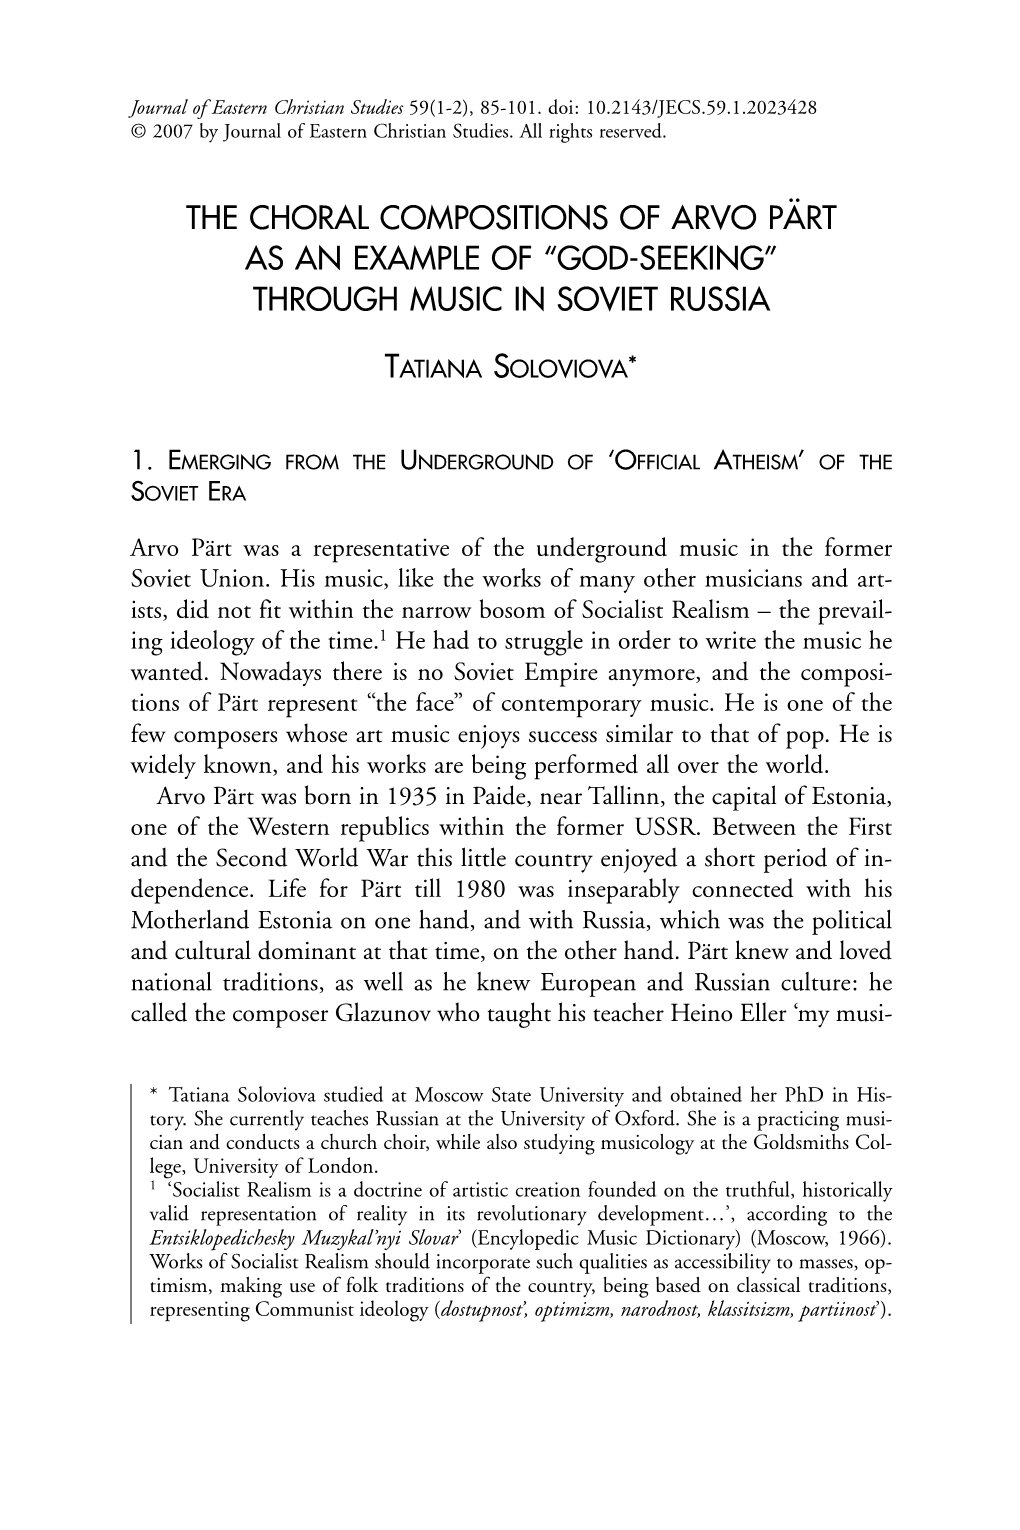 The Choral Compositions of Arvo Pärt As an Example of “God-Seeking” Through Music in Soviet Russia